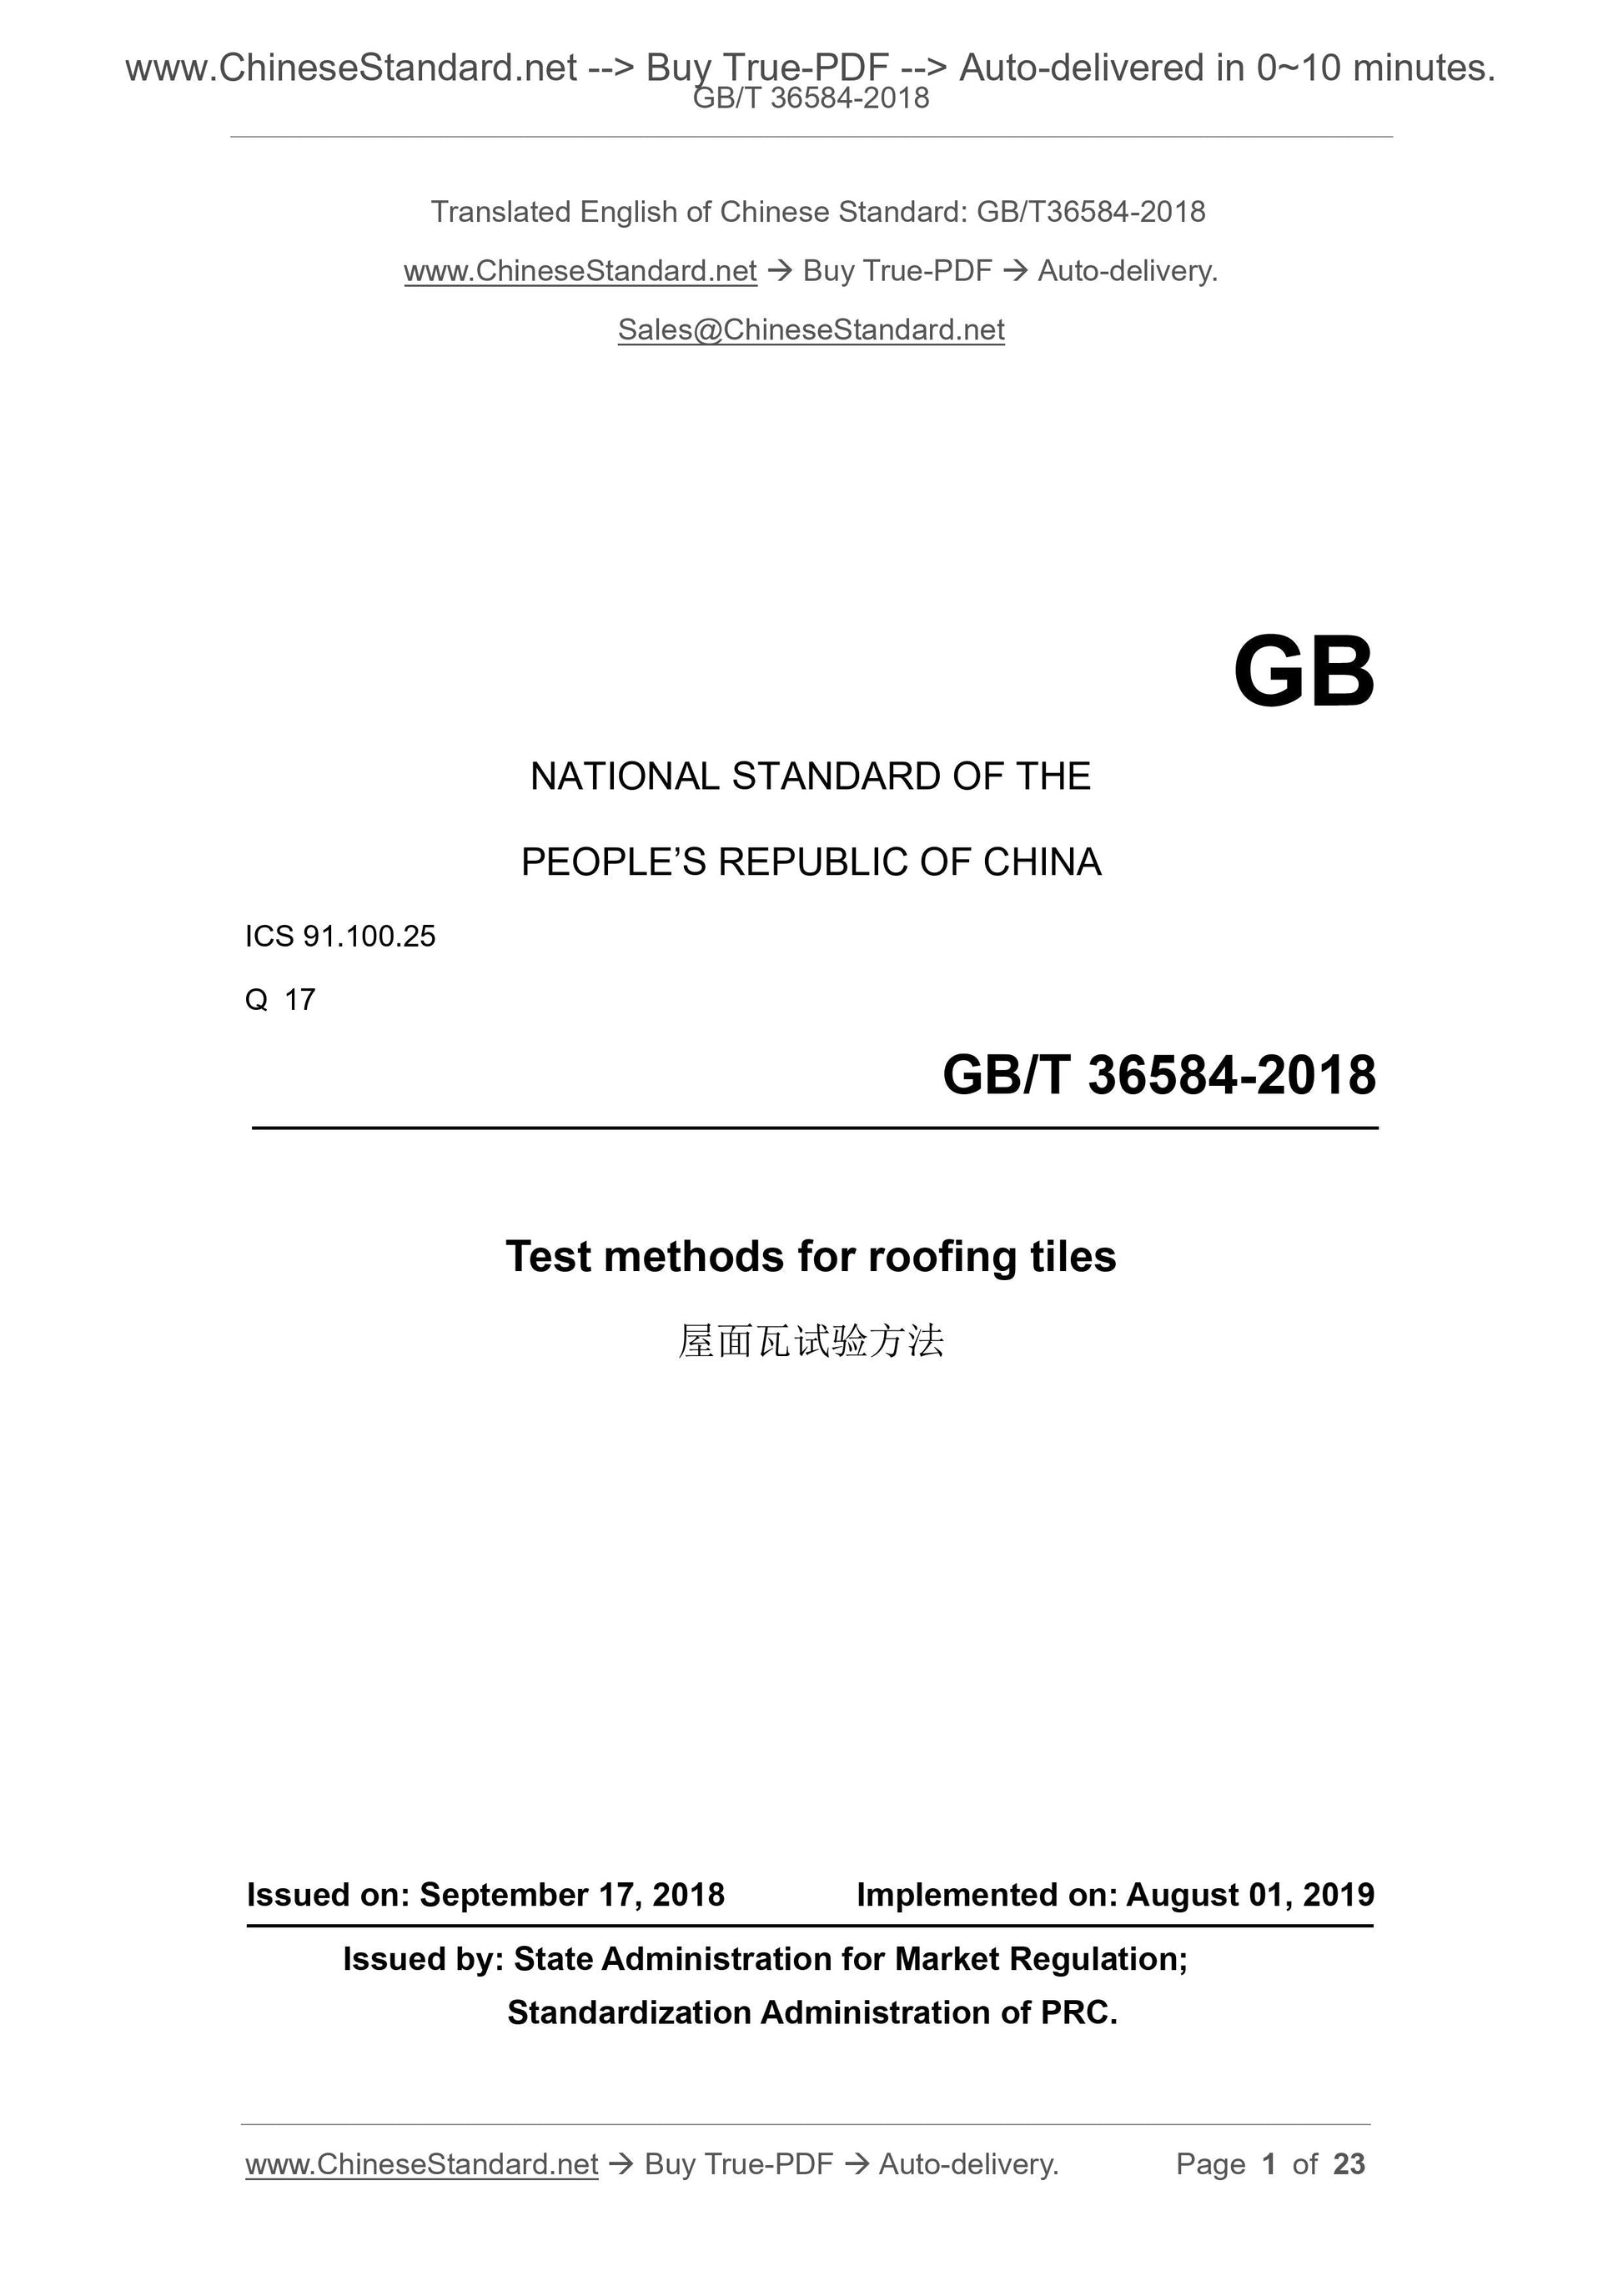 GB/T 36584-2018 Page 1